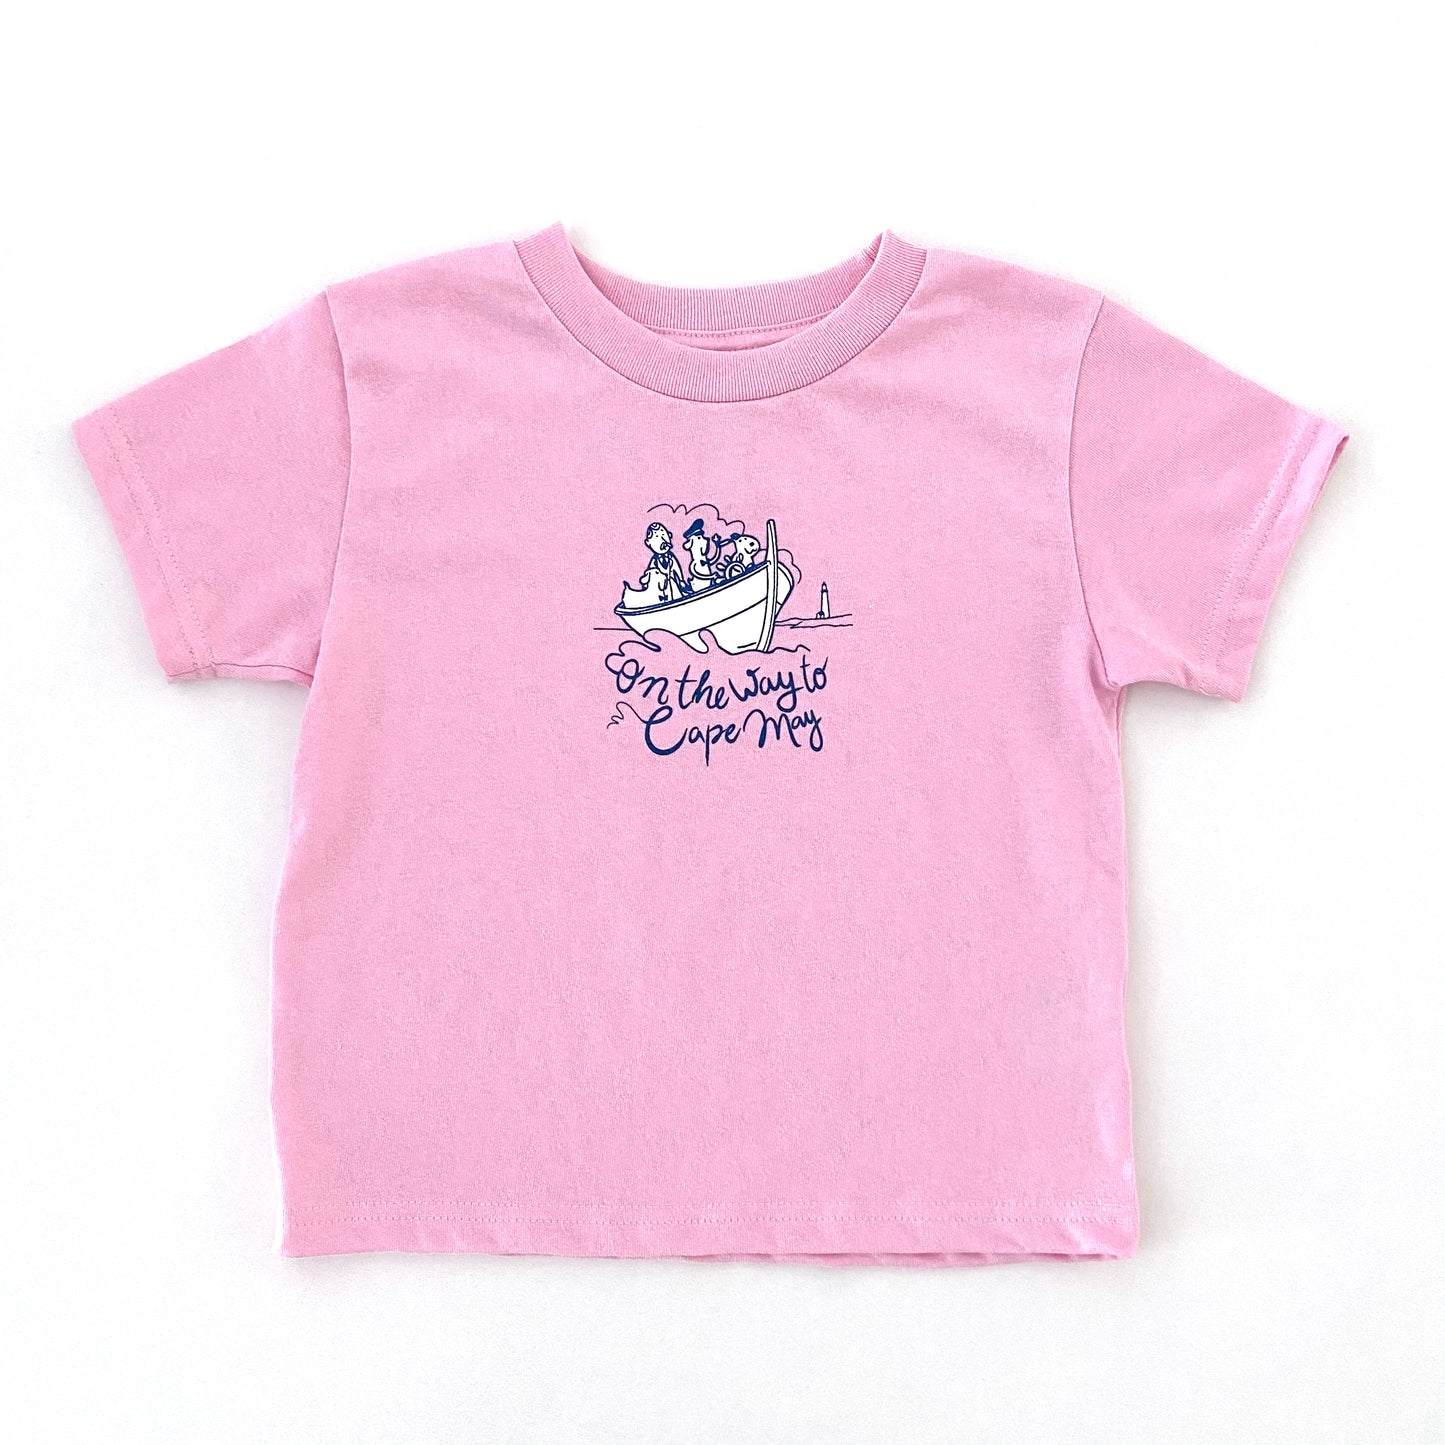 By Boat Toddler T-Shirt in Pink